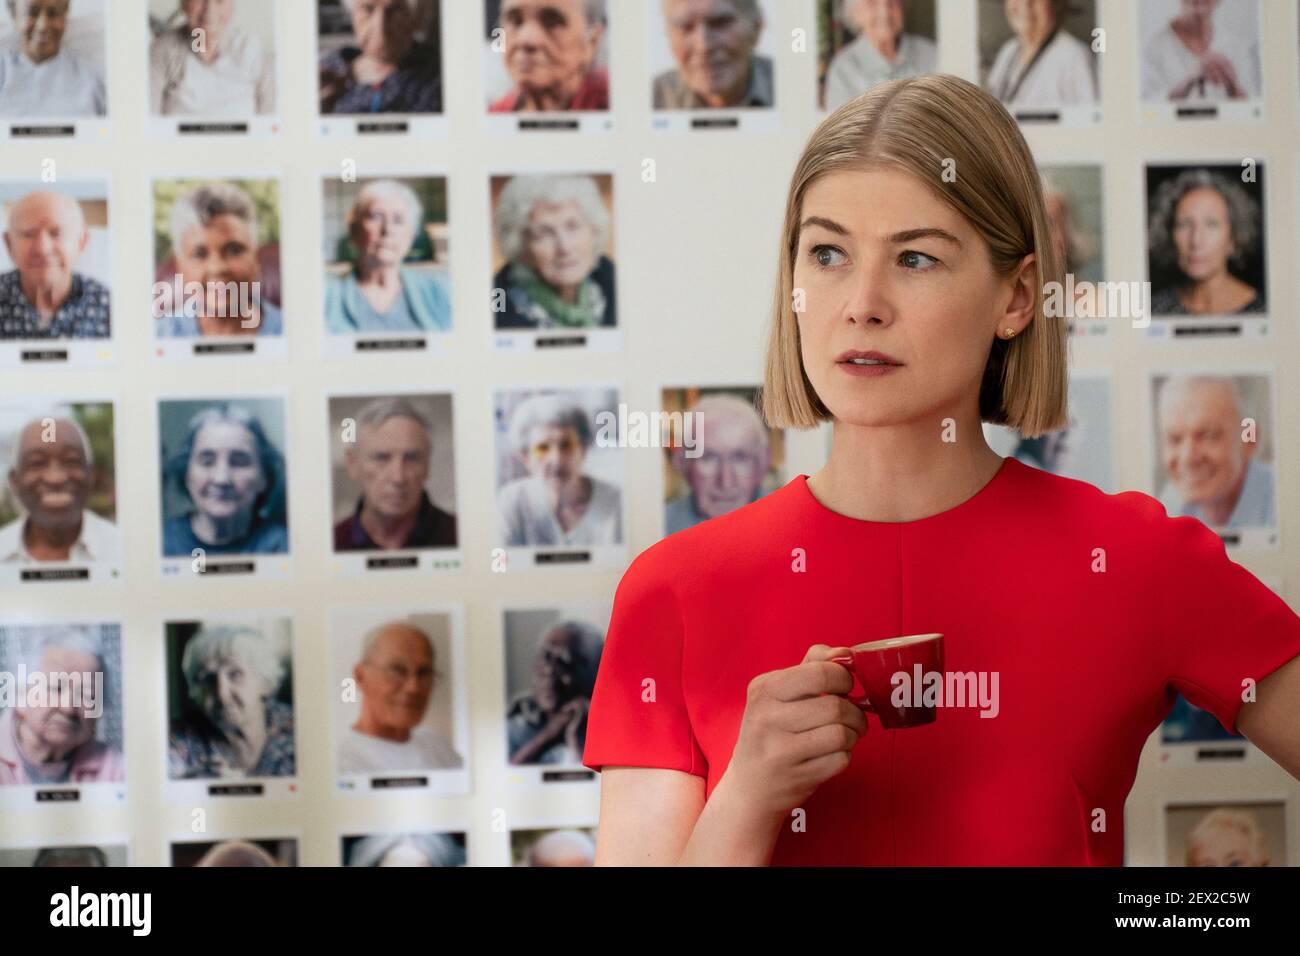 I Care a Lot (2020) directed by J Blakeson and starring Rosamund Pike as Marla Grayson, a crooked legal guardian who drains the savings of her elderly wards but meets her match when a woman she tries to swindle turns out to be more than she first appears. Stock Photo